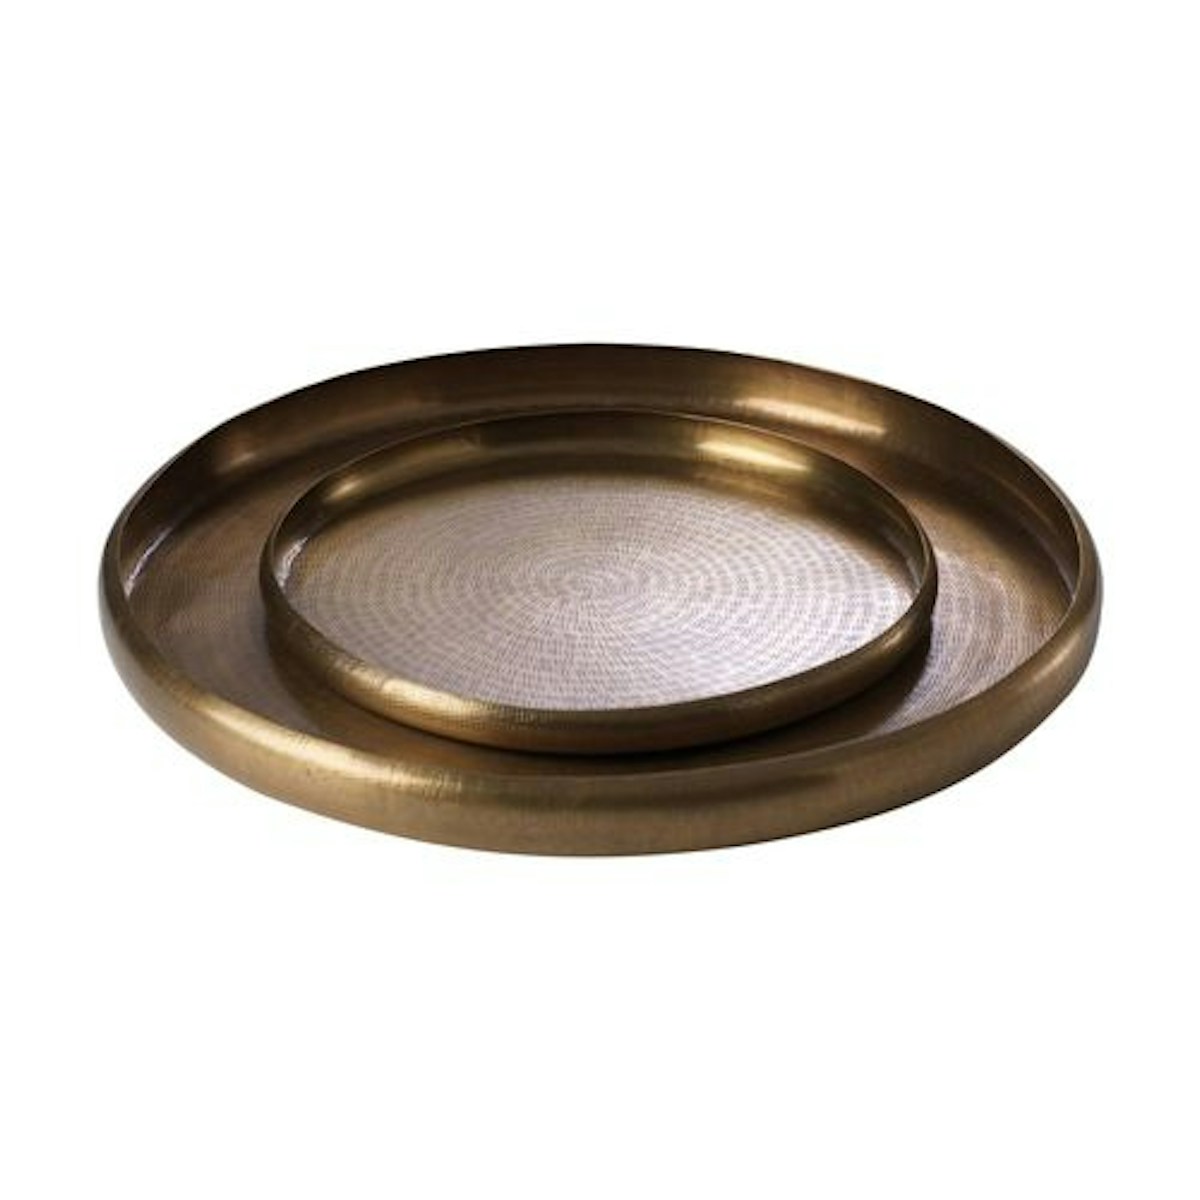 Offering Tray - 21 Best Decorative Trays To Buy For Your Tabletop - LuxDeco.com